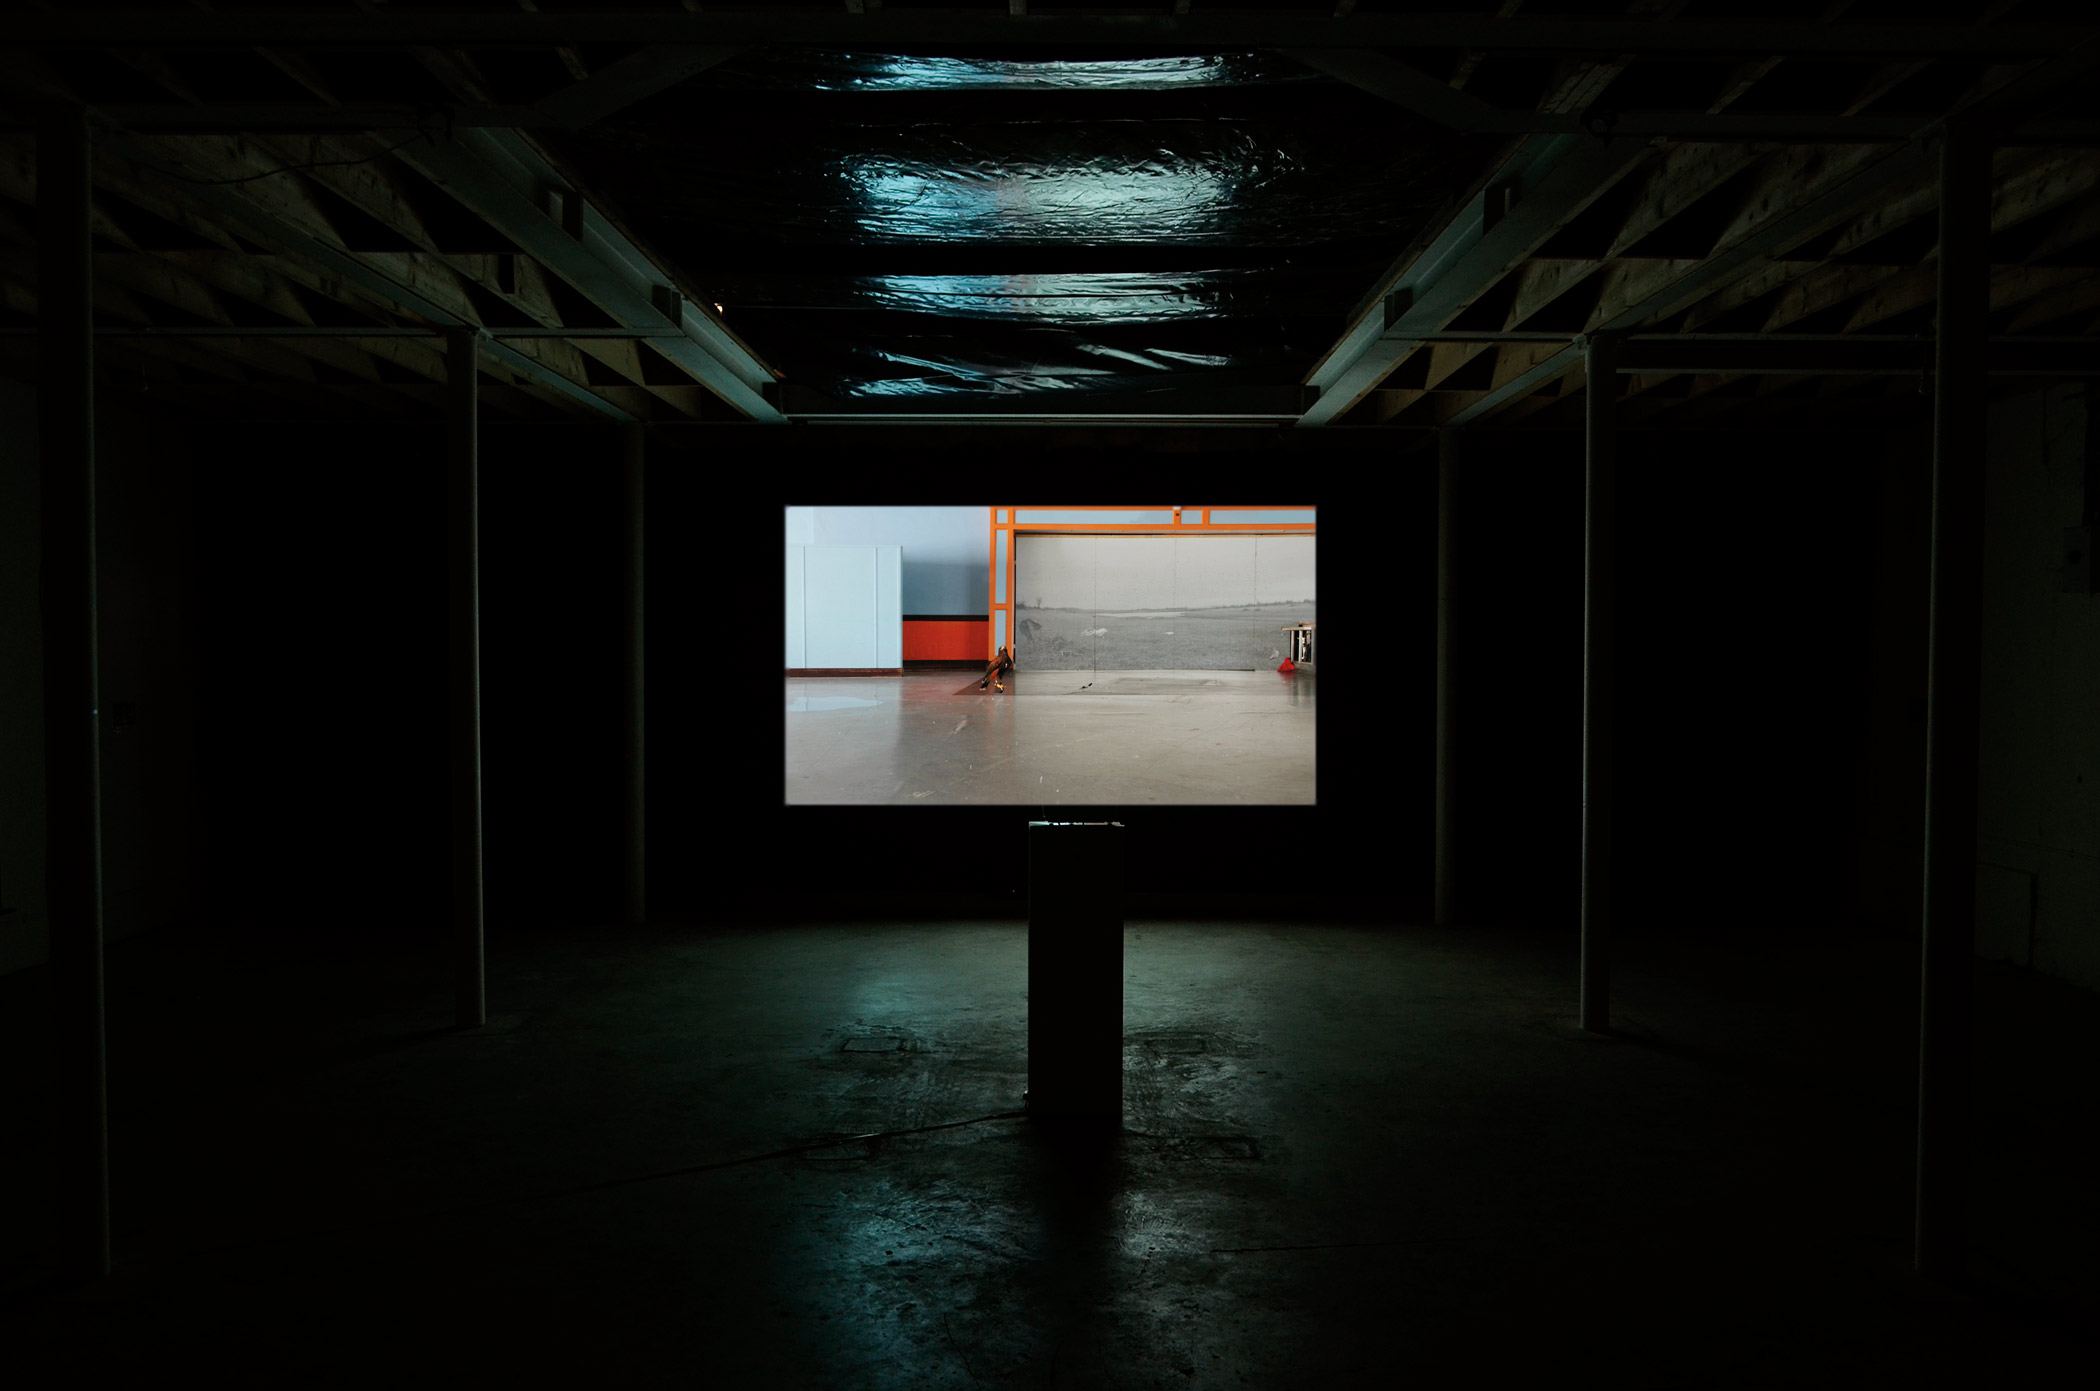 Ailbhe Ní Bhriain 'Departure' single channel installation, video & cgi composite, colour, sound, looped, 11:48 min, sound by Pá́draig Murphy 2013/4; installation view from Ailbhe Ní Bhriain's solo exhibition at Drogheda Arts Festival, in partnership with NeXus Arts, former Methodist Schoolhouse, Drogheda, Ireland, 2015, photo by Els Borghart.